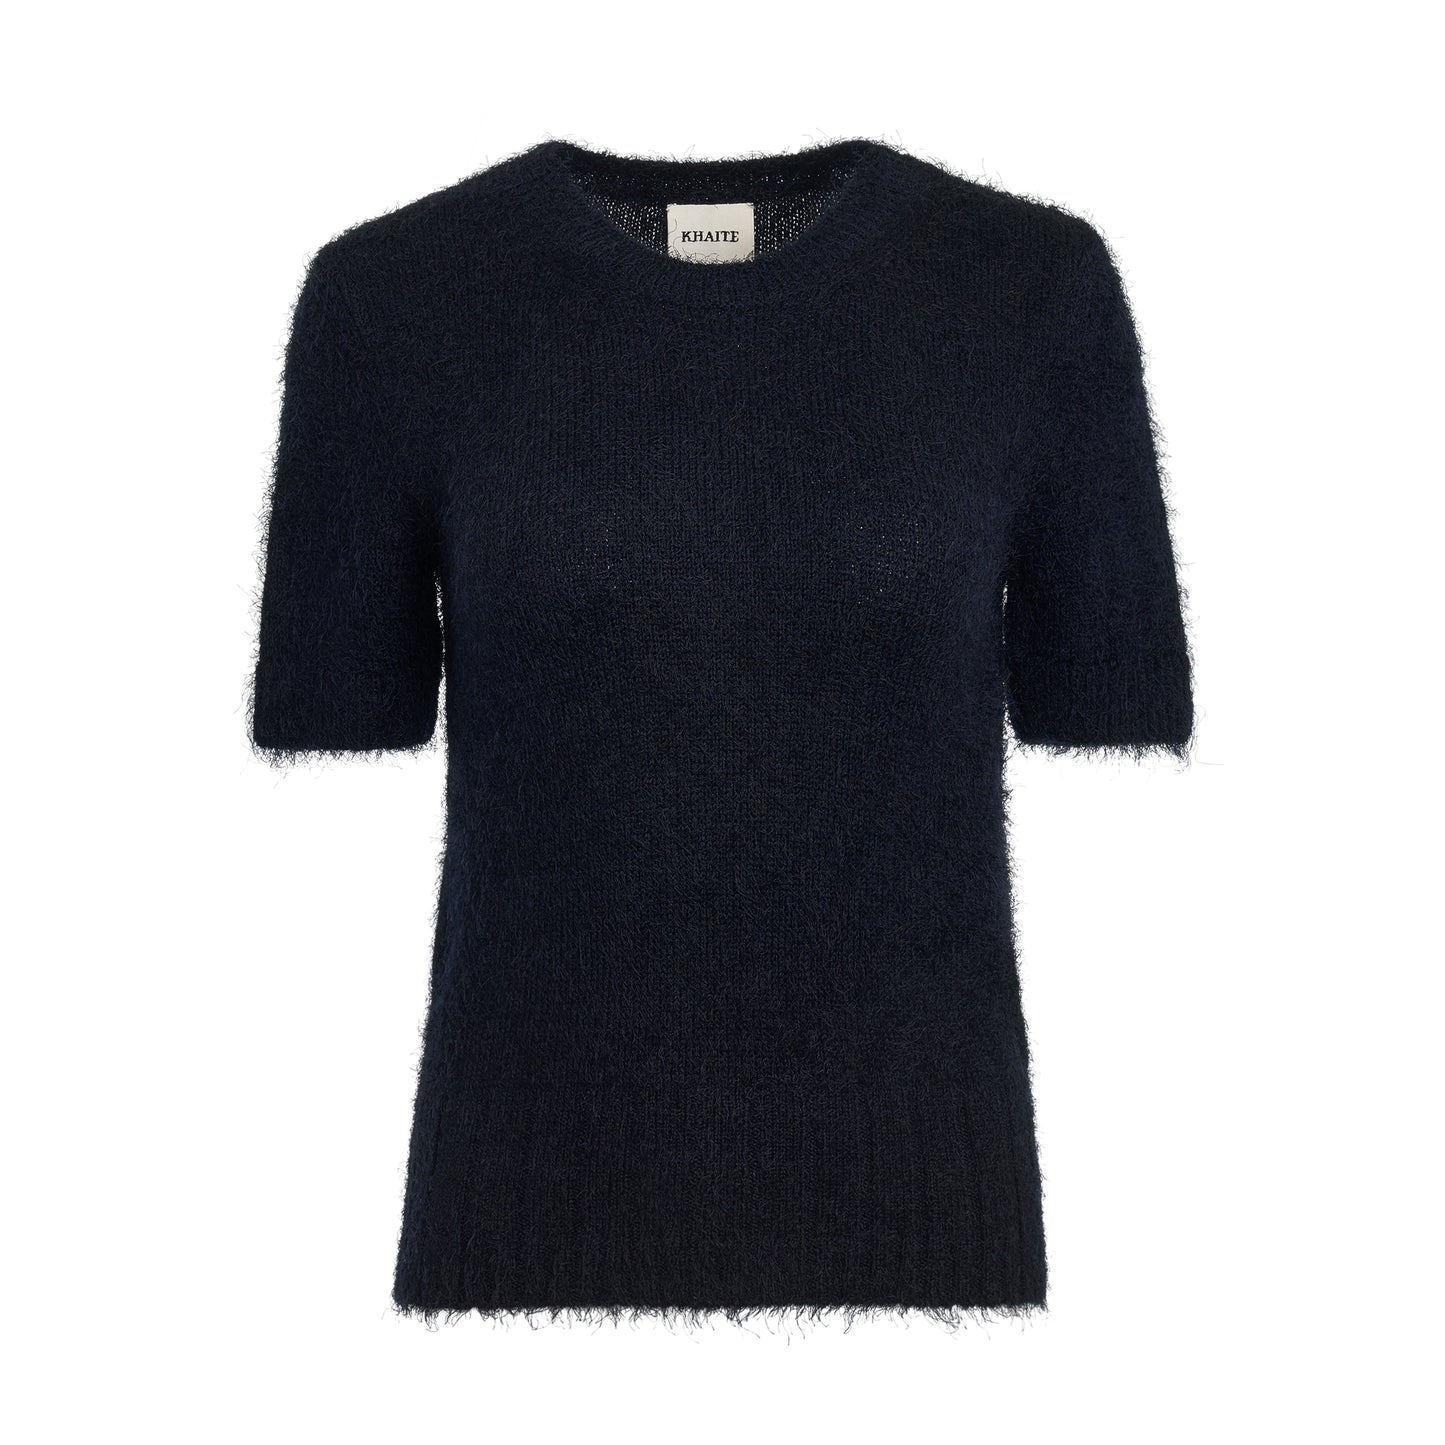 Luphia Sweater in Navy